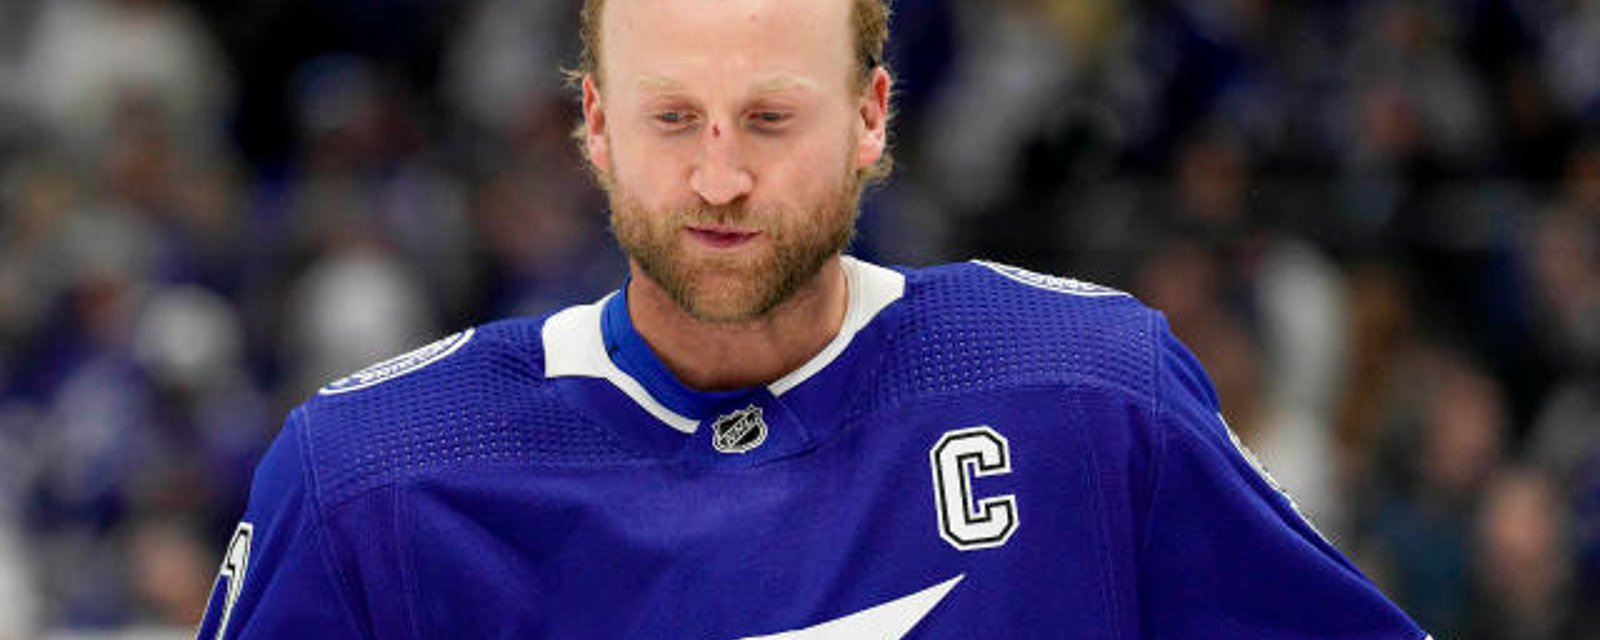 Huge blow to Steven Stamkos, again from his own team!